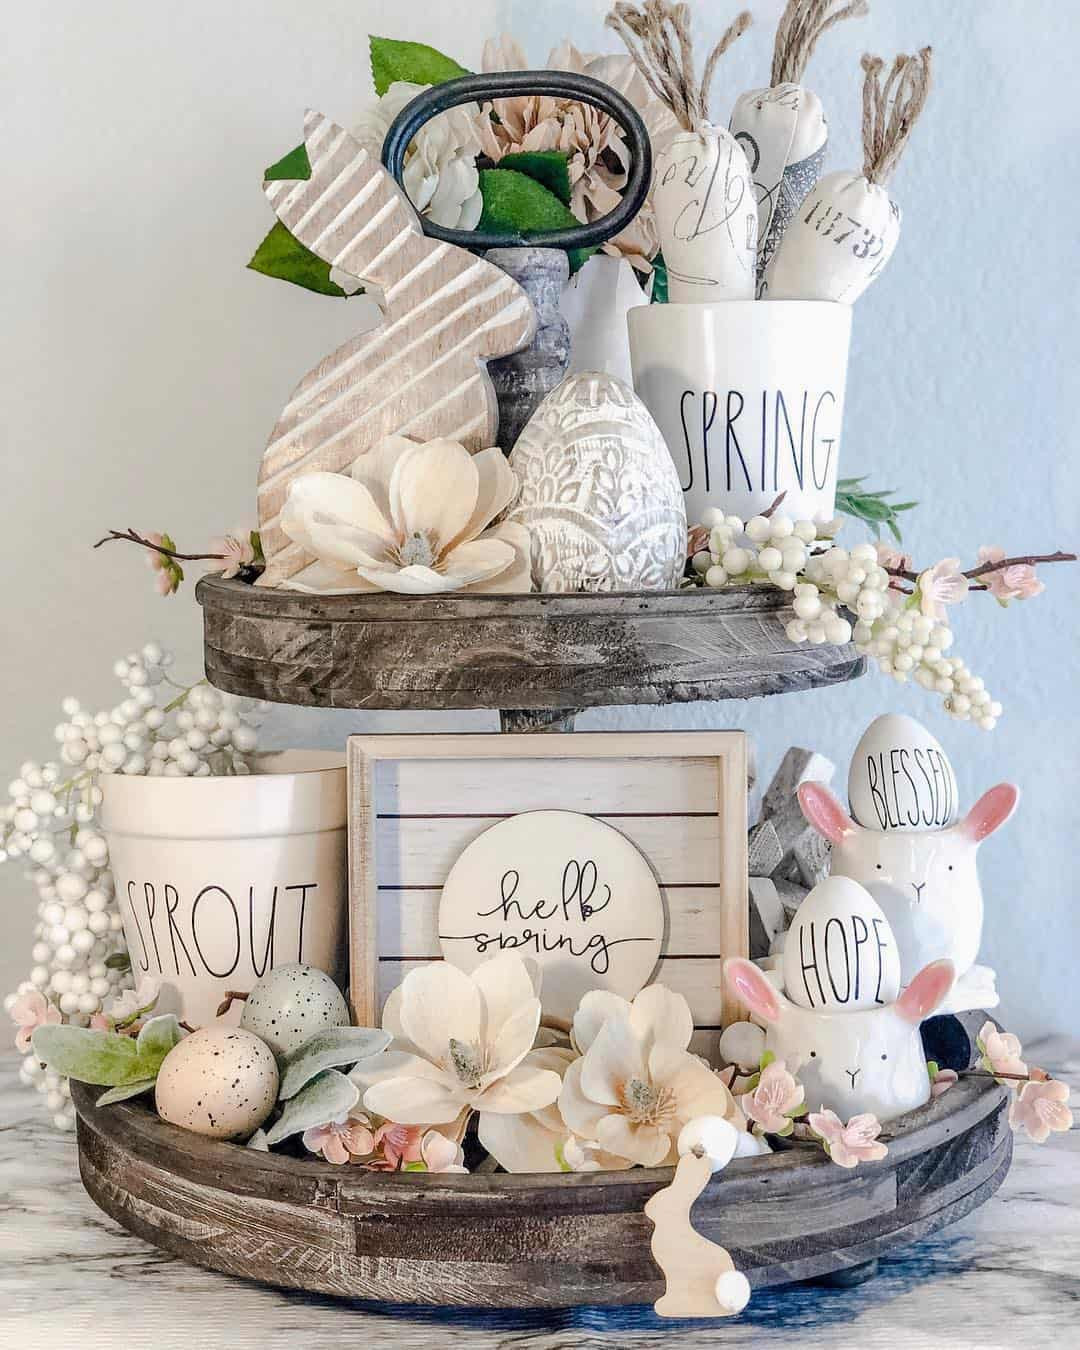 Easter Home Decorating Ideas
 25 Cute Easter Decoration Ideas To Spruce Up Your Home